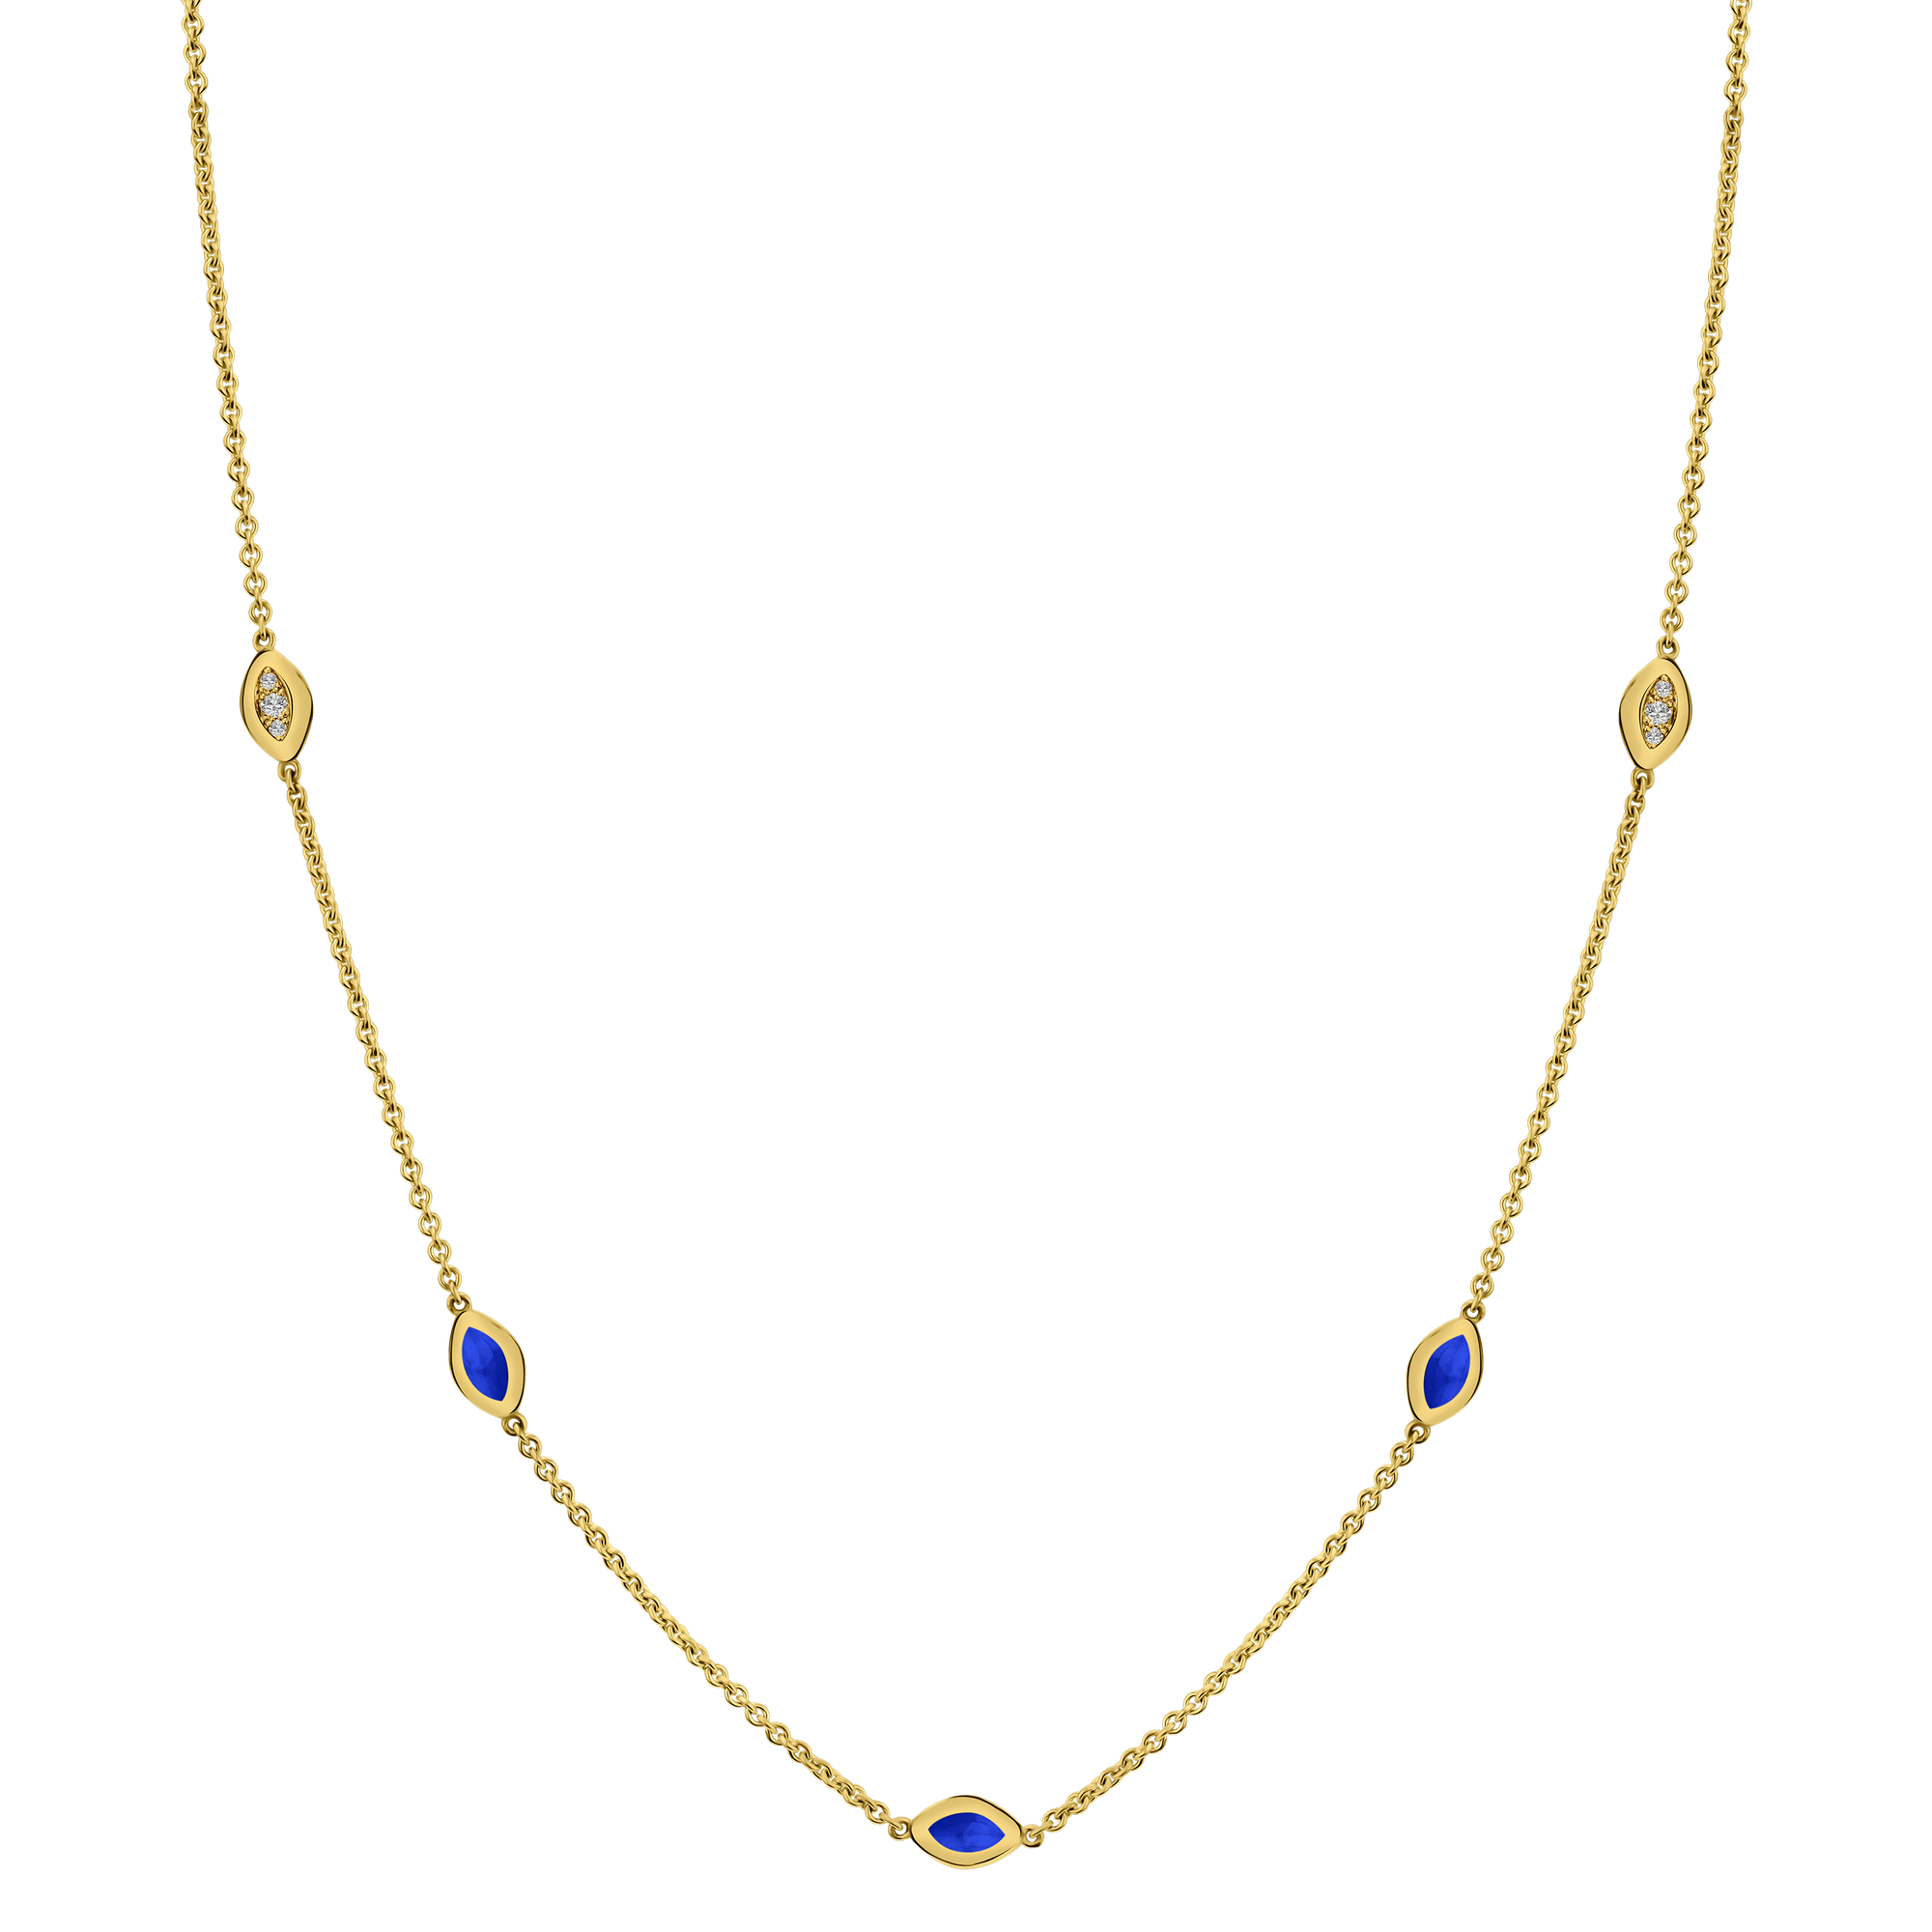 Five Link Italian Gold Necklace with Blue Enamel and Diamond Pave